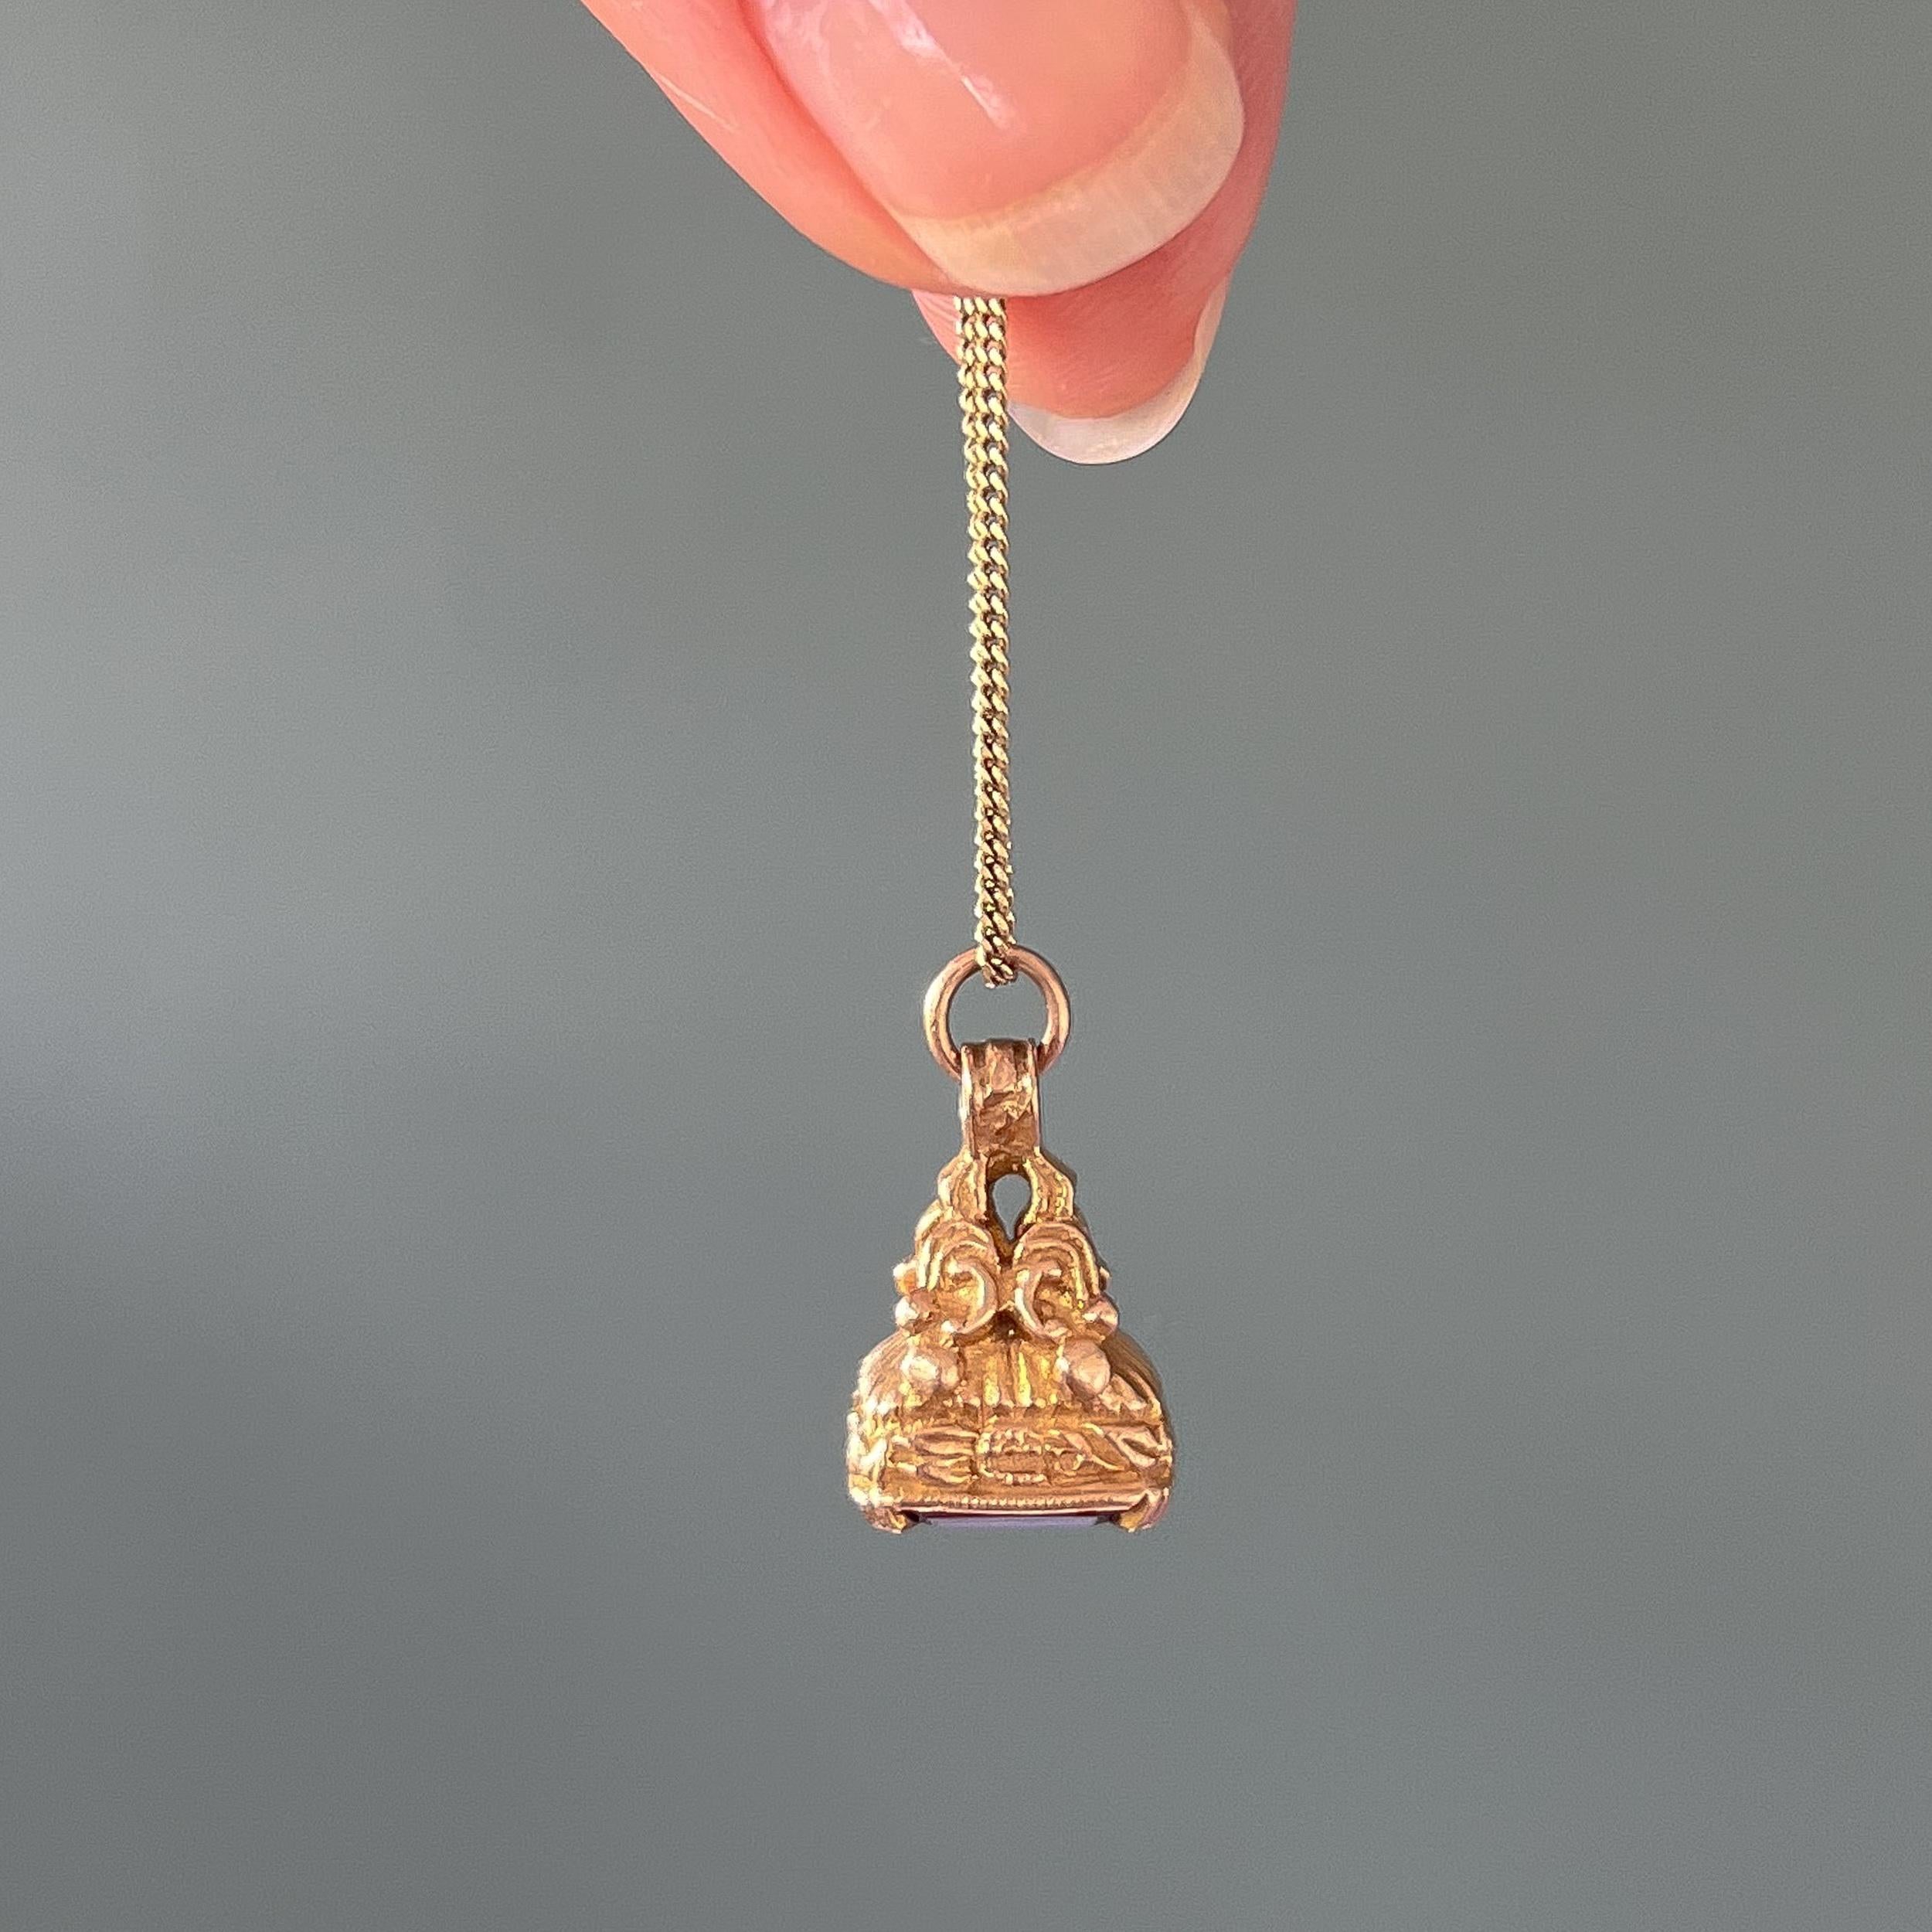 This lovely fob charm pendant is made of 9 karat gold and it carries a plate of dark red carnelian at the bottom. The charm is nicely detailed with scrolling gold and engraved details. This pendant is a miniature fob as they were made in Georgian